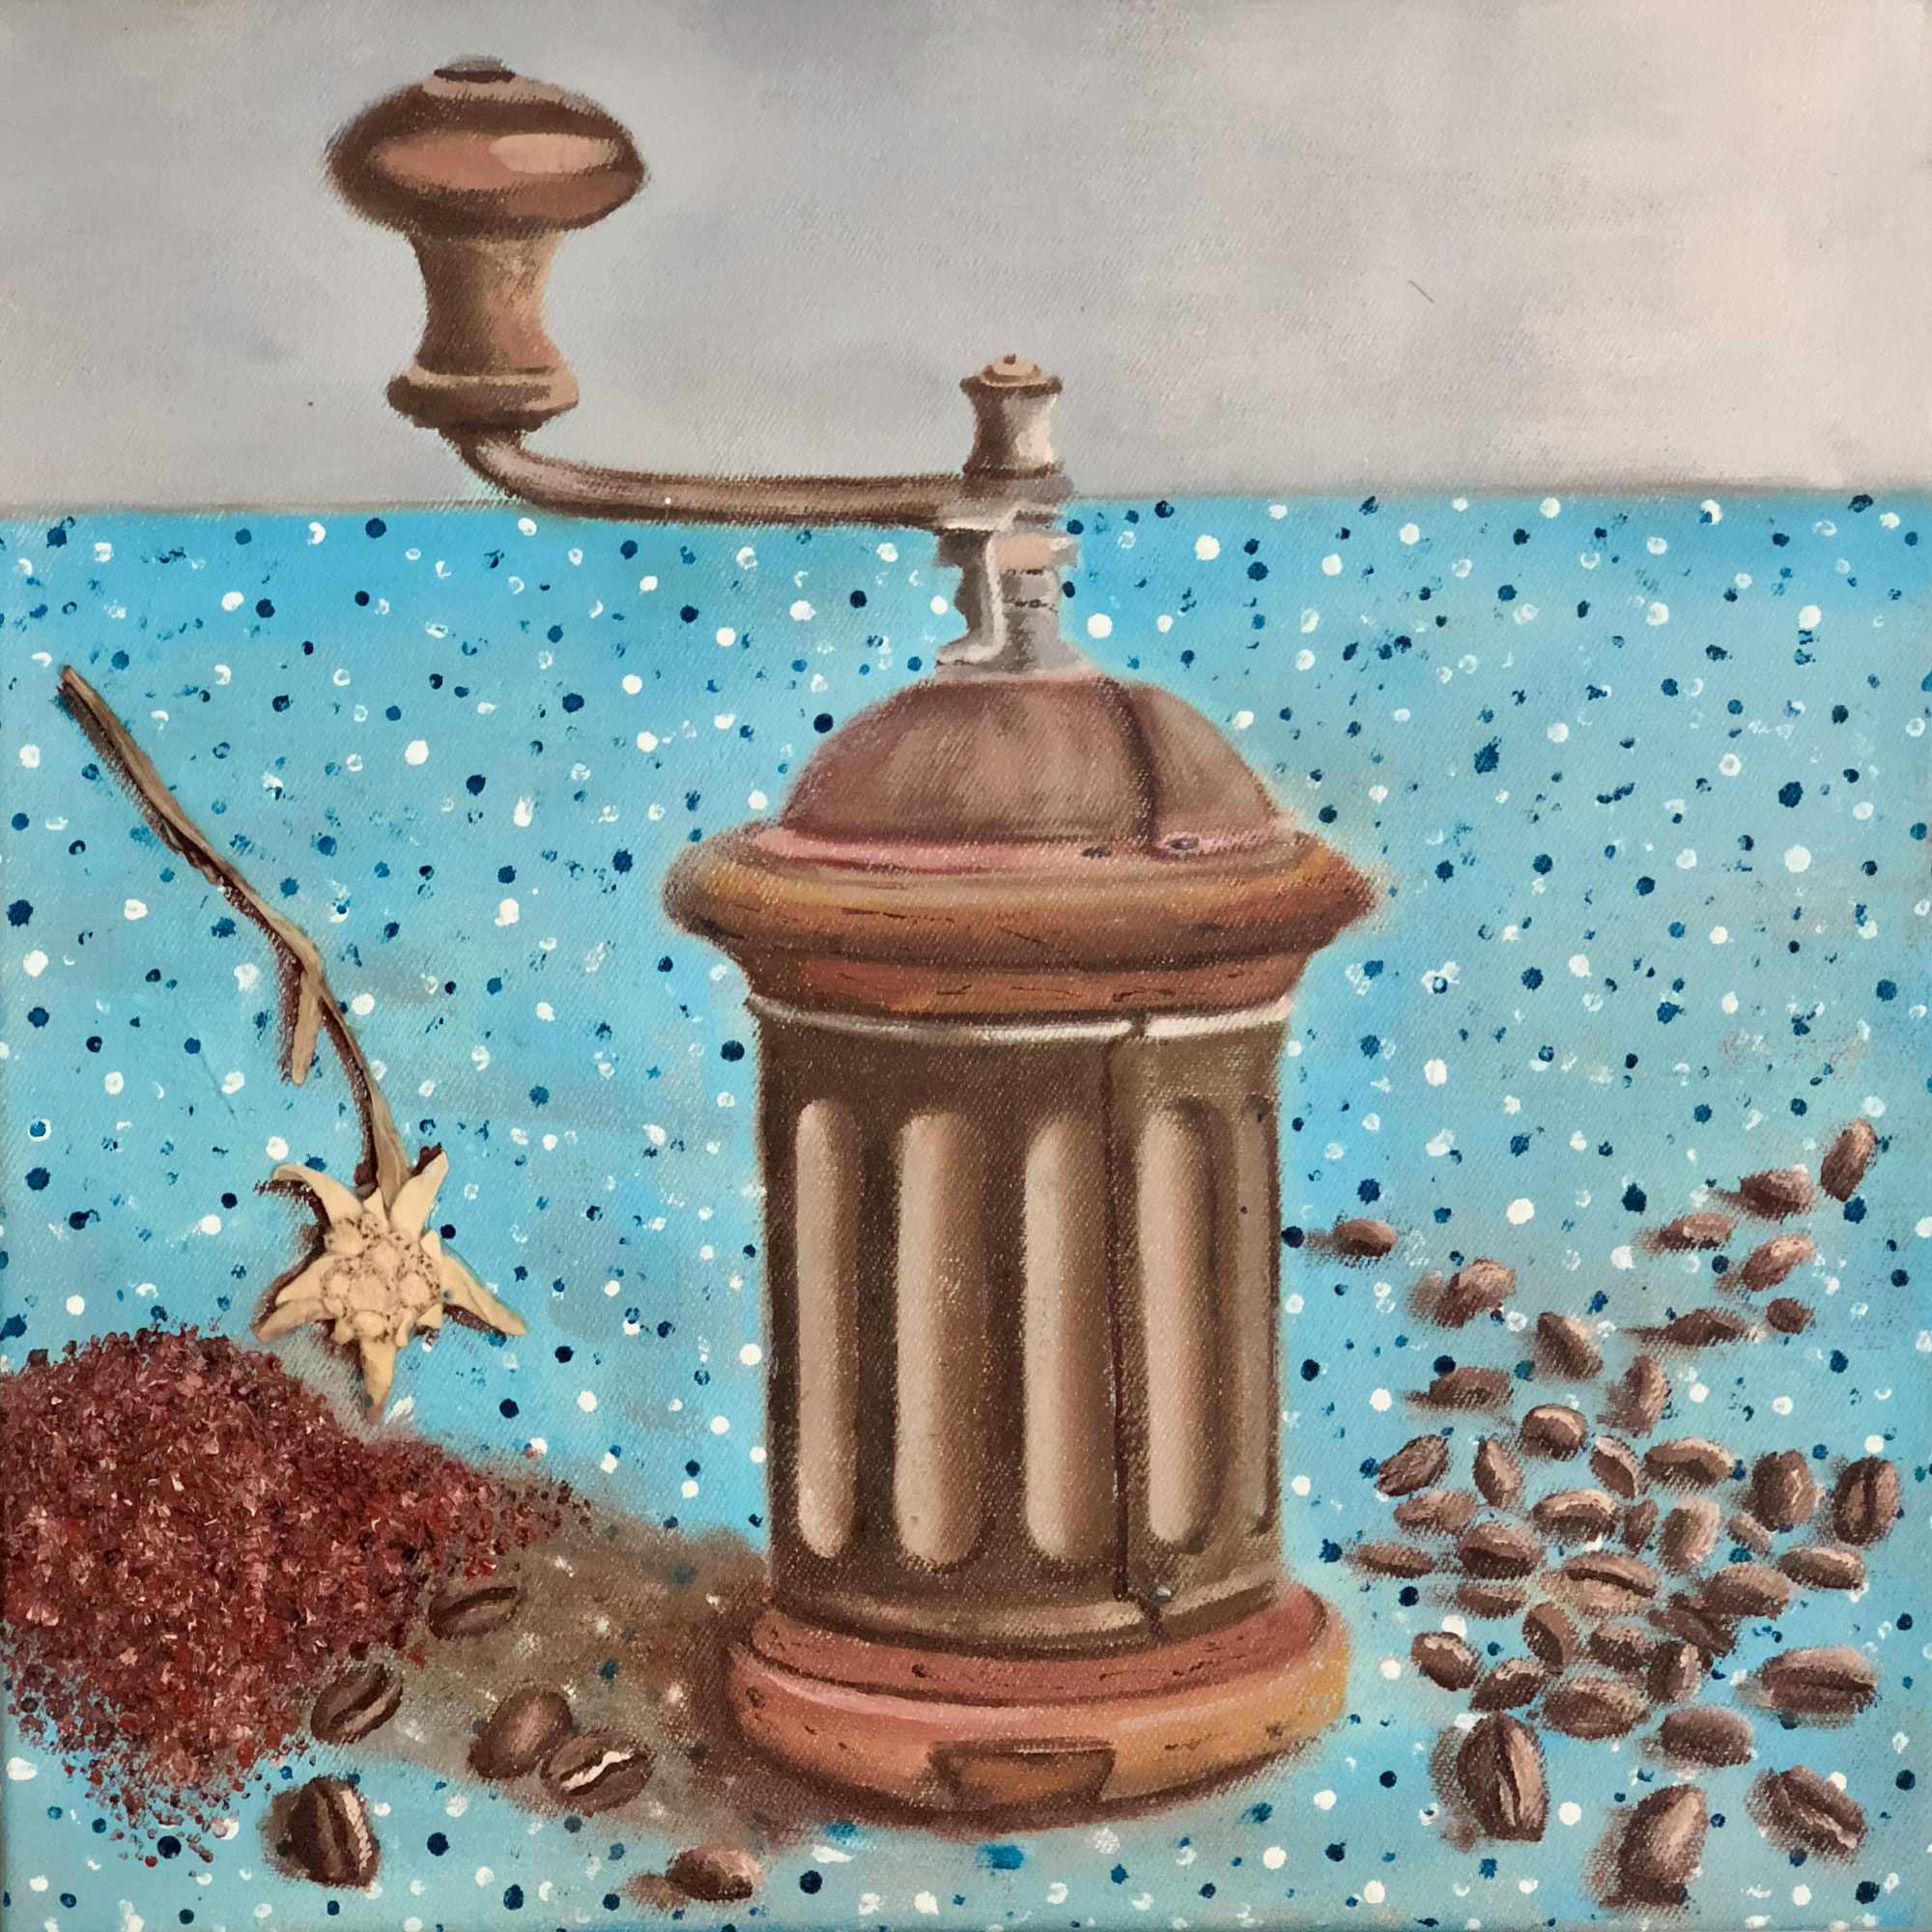 Nonnas Coffee Grinder - Oil on Canvas - 300 x 300mm - SOLD